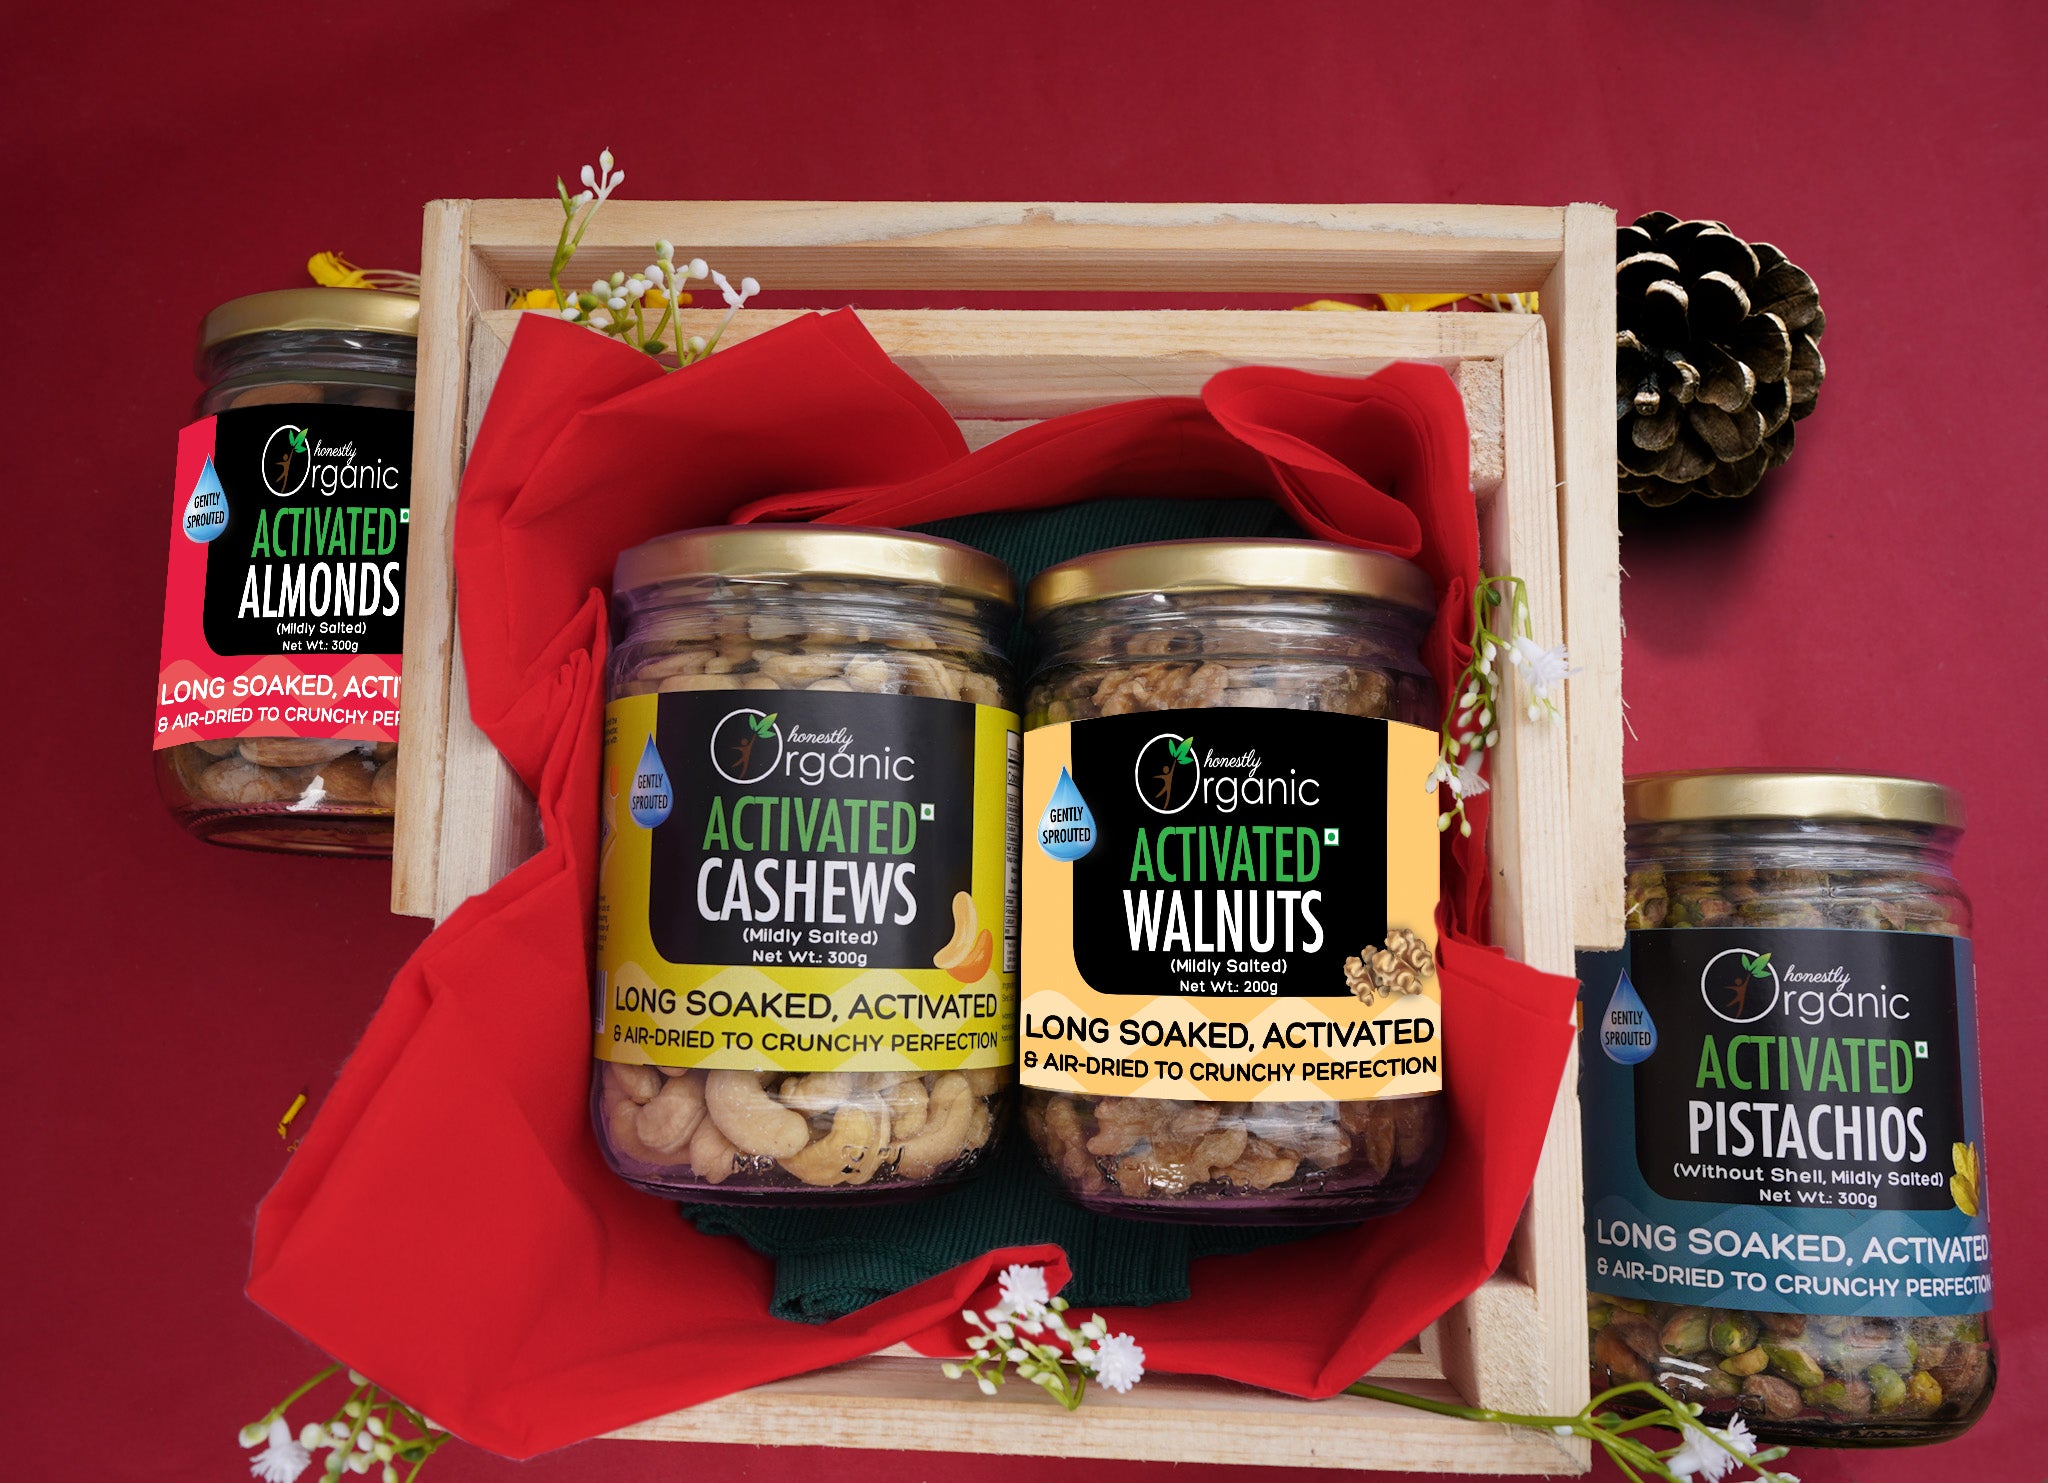 D-Alive Special Christmas Hamper (Activated Walnuts  200g + Activated Pistachios 300g + Activated Cashews 300g + Activated Almond 300g) - 1100g (Diabetes Friendly, Organic, No Gluten, No Sugar, Vegan, Natural)